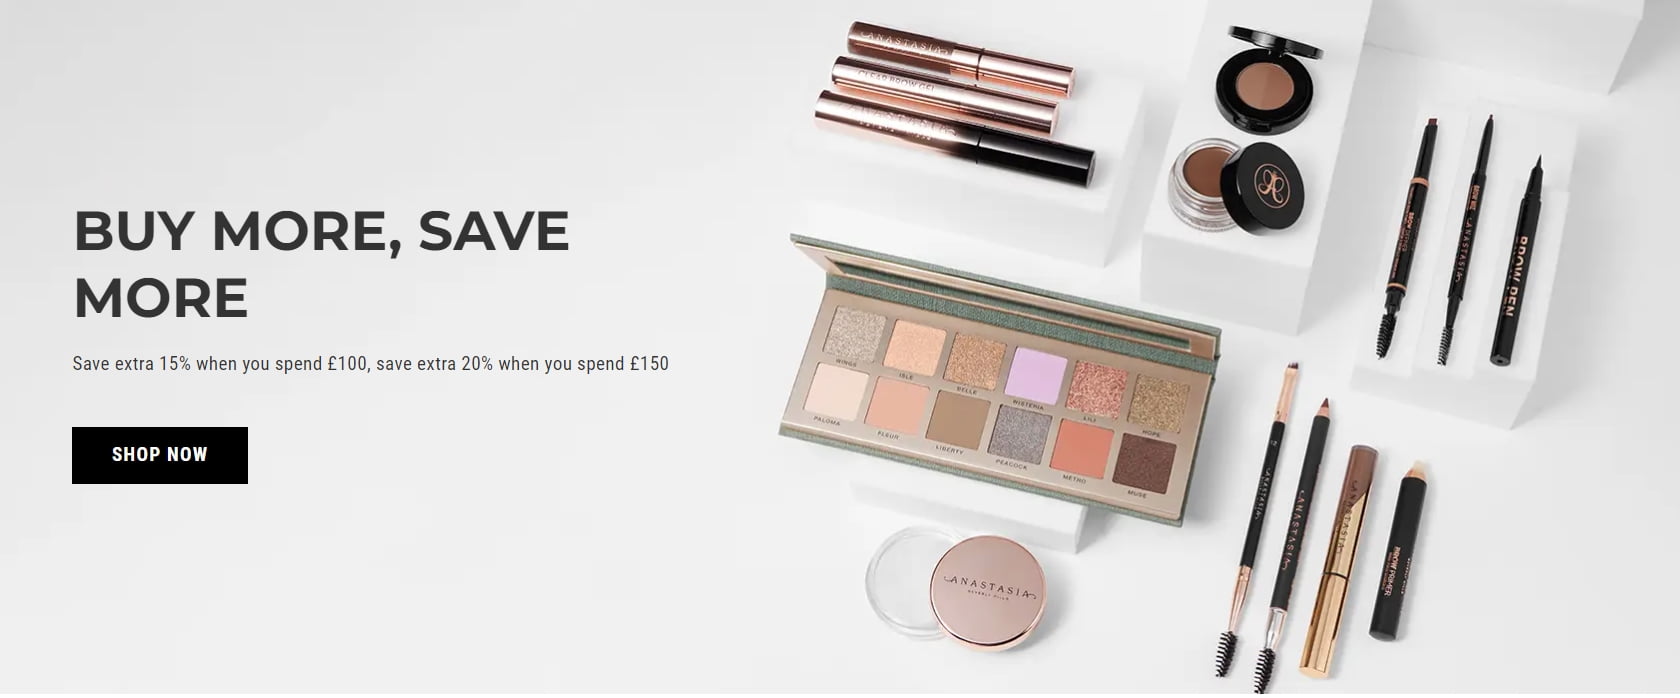 Extra 15% off when you spend £100 or 20% off when you spend £150 at Anastasia Beverly Hills